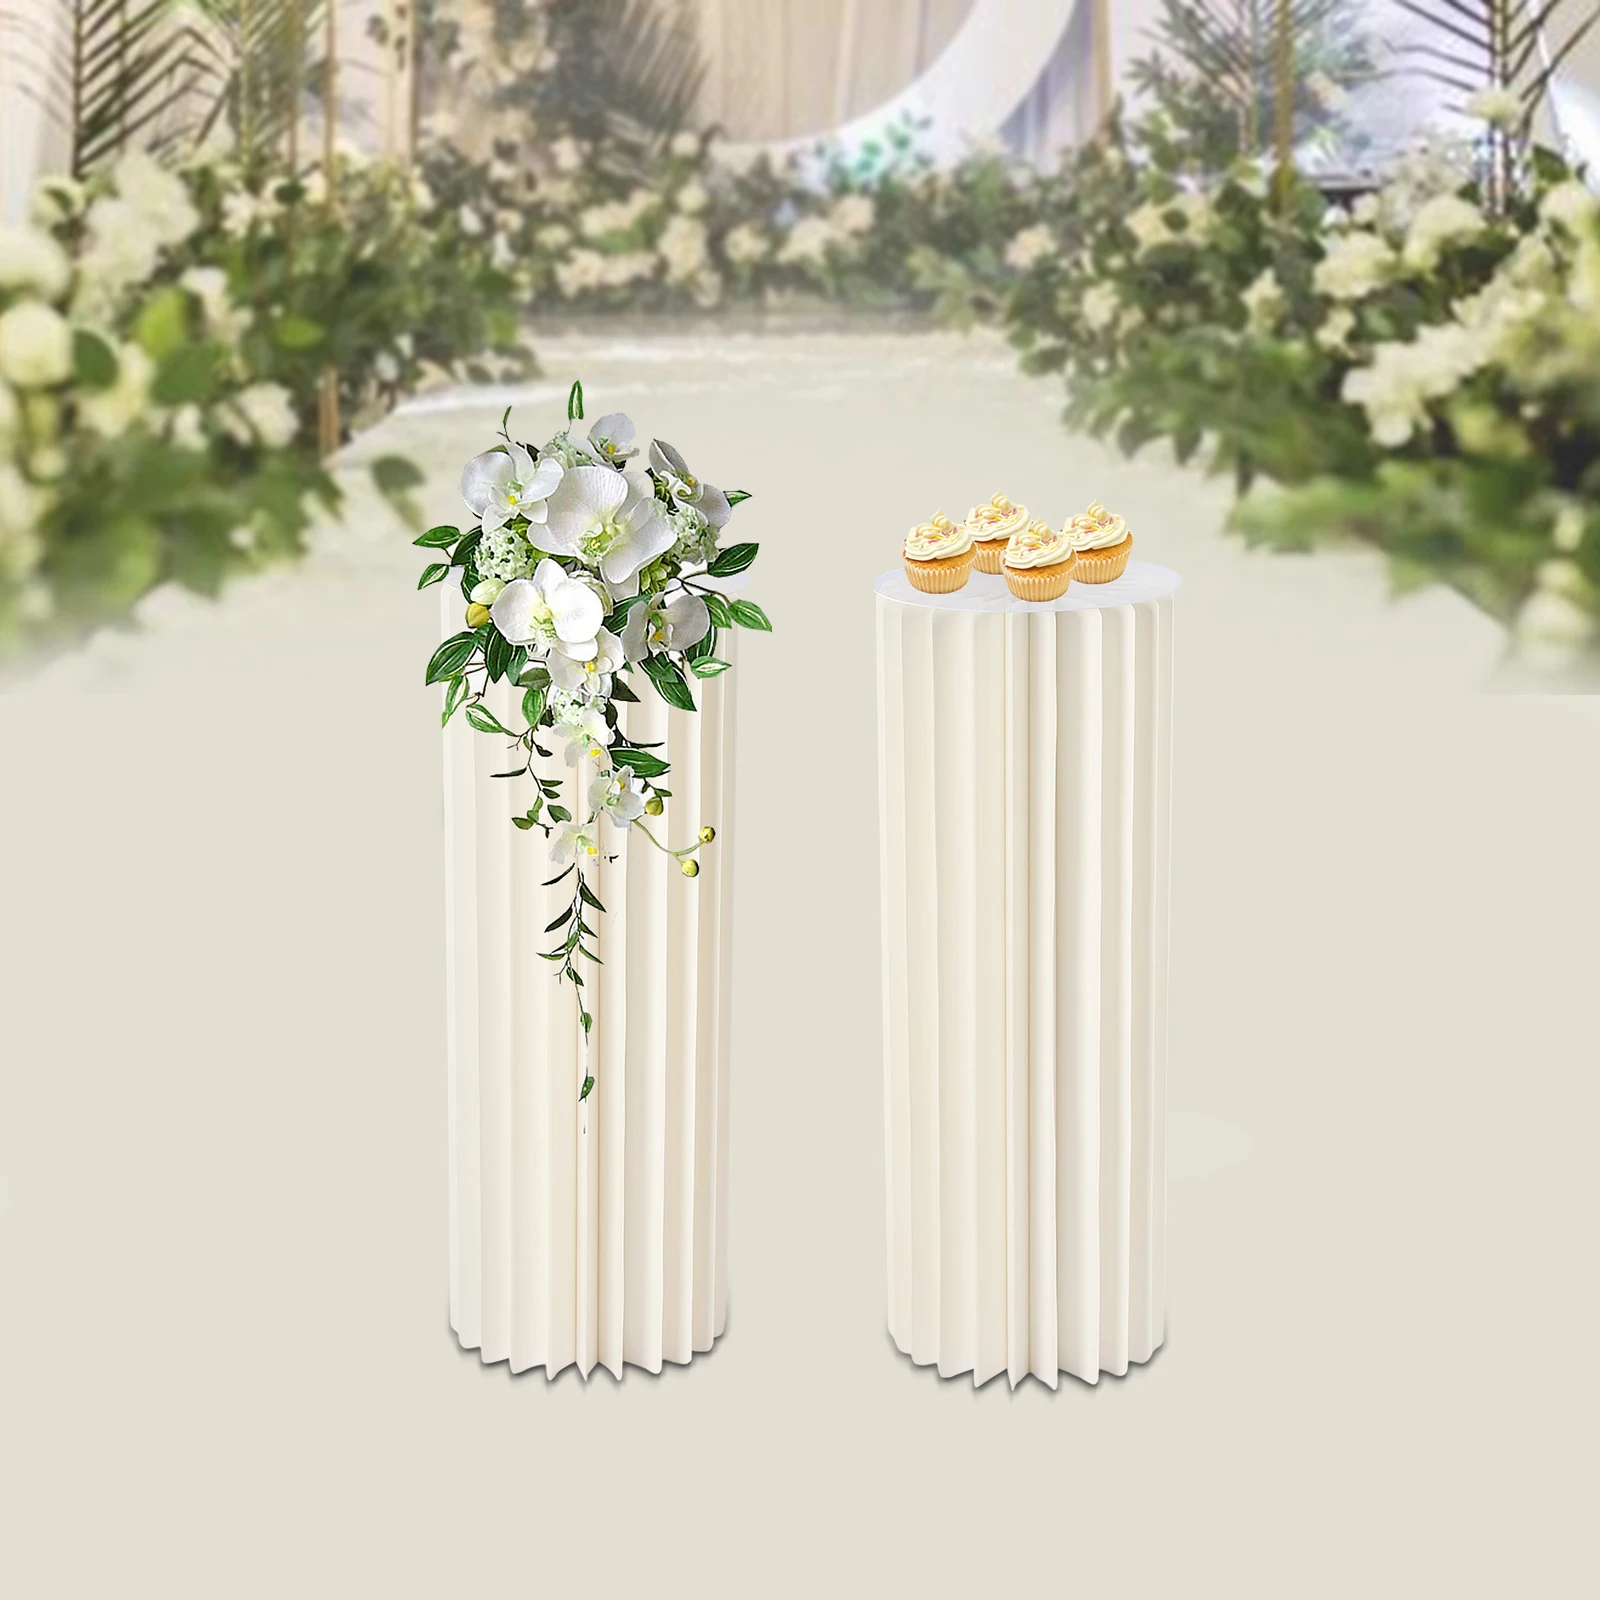 

2 Pcs 31.5in Tall Flower Vase Flowers Stand Centerpiece Stands for Party Tables Decorations